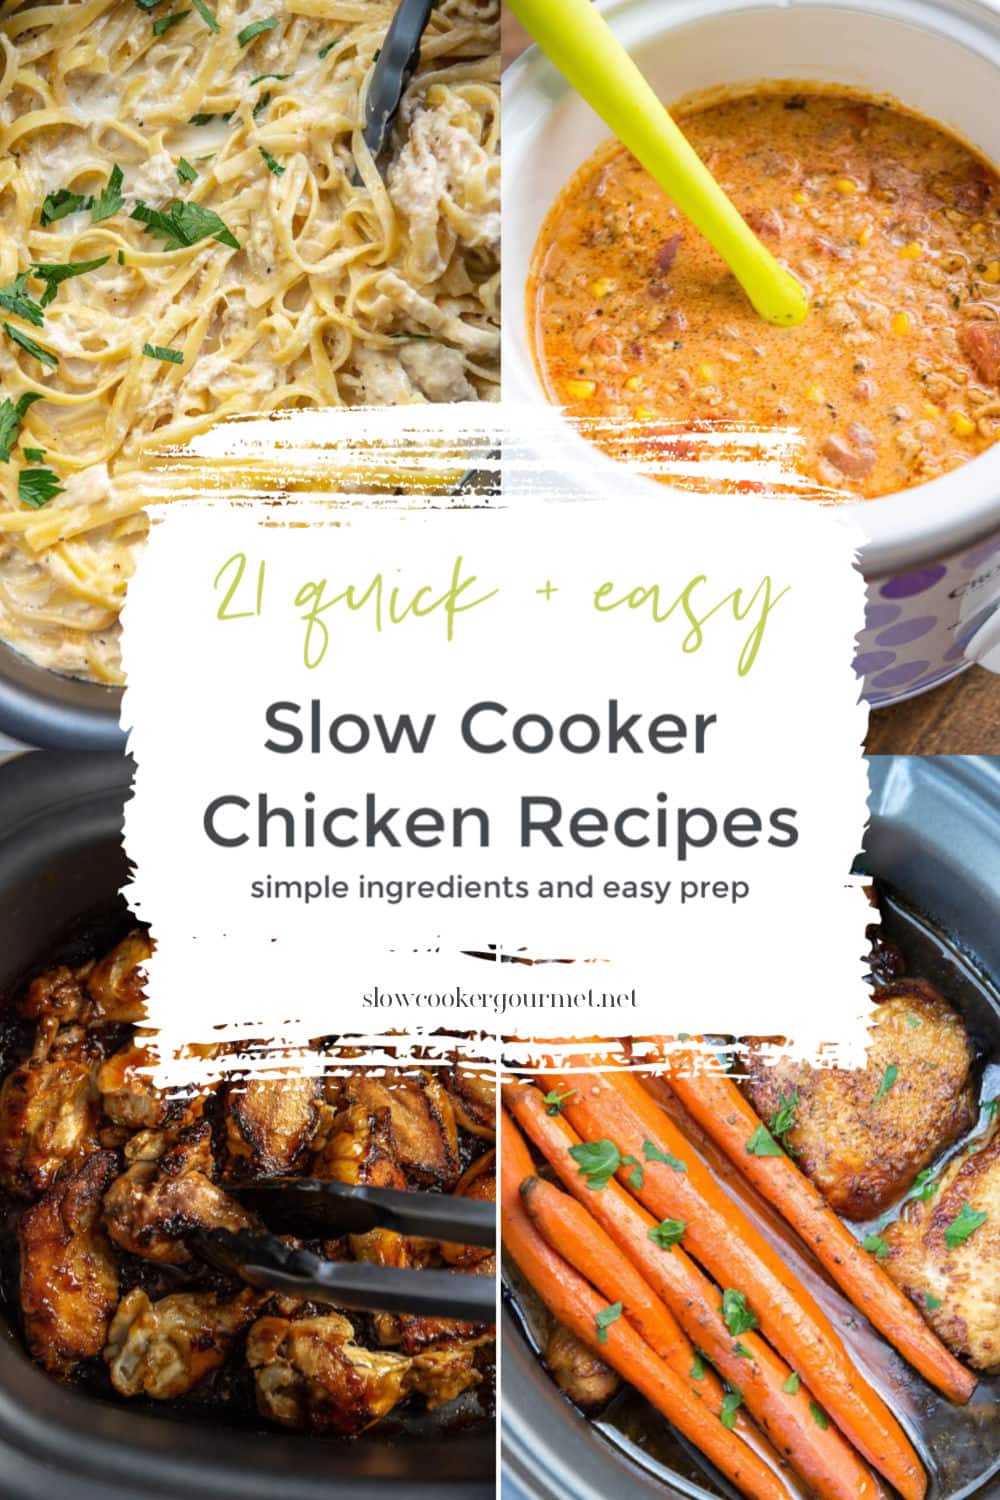 21 Quick and Easy Slow Cooker Chicken Recipes